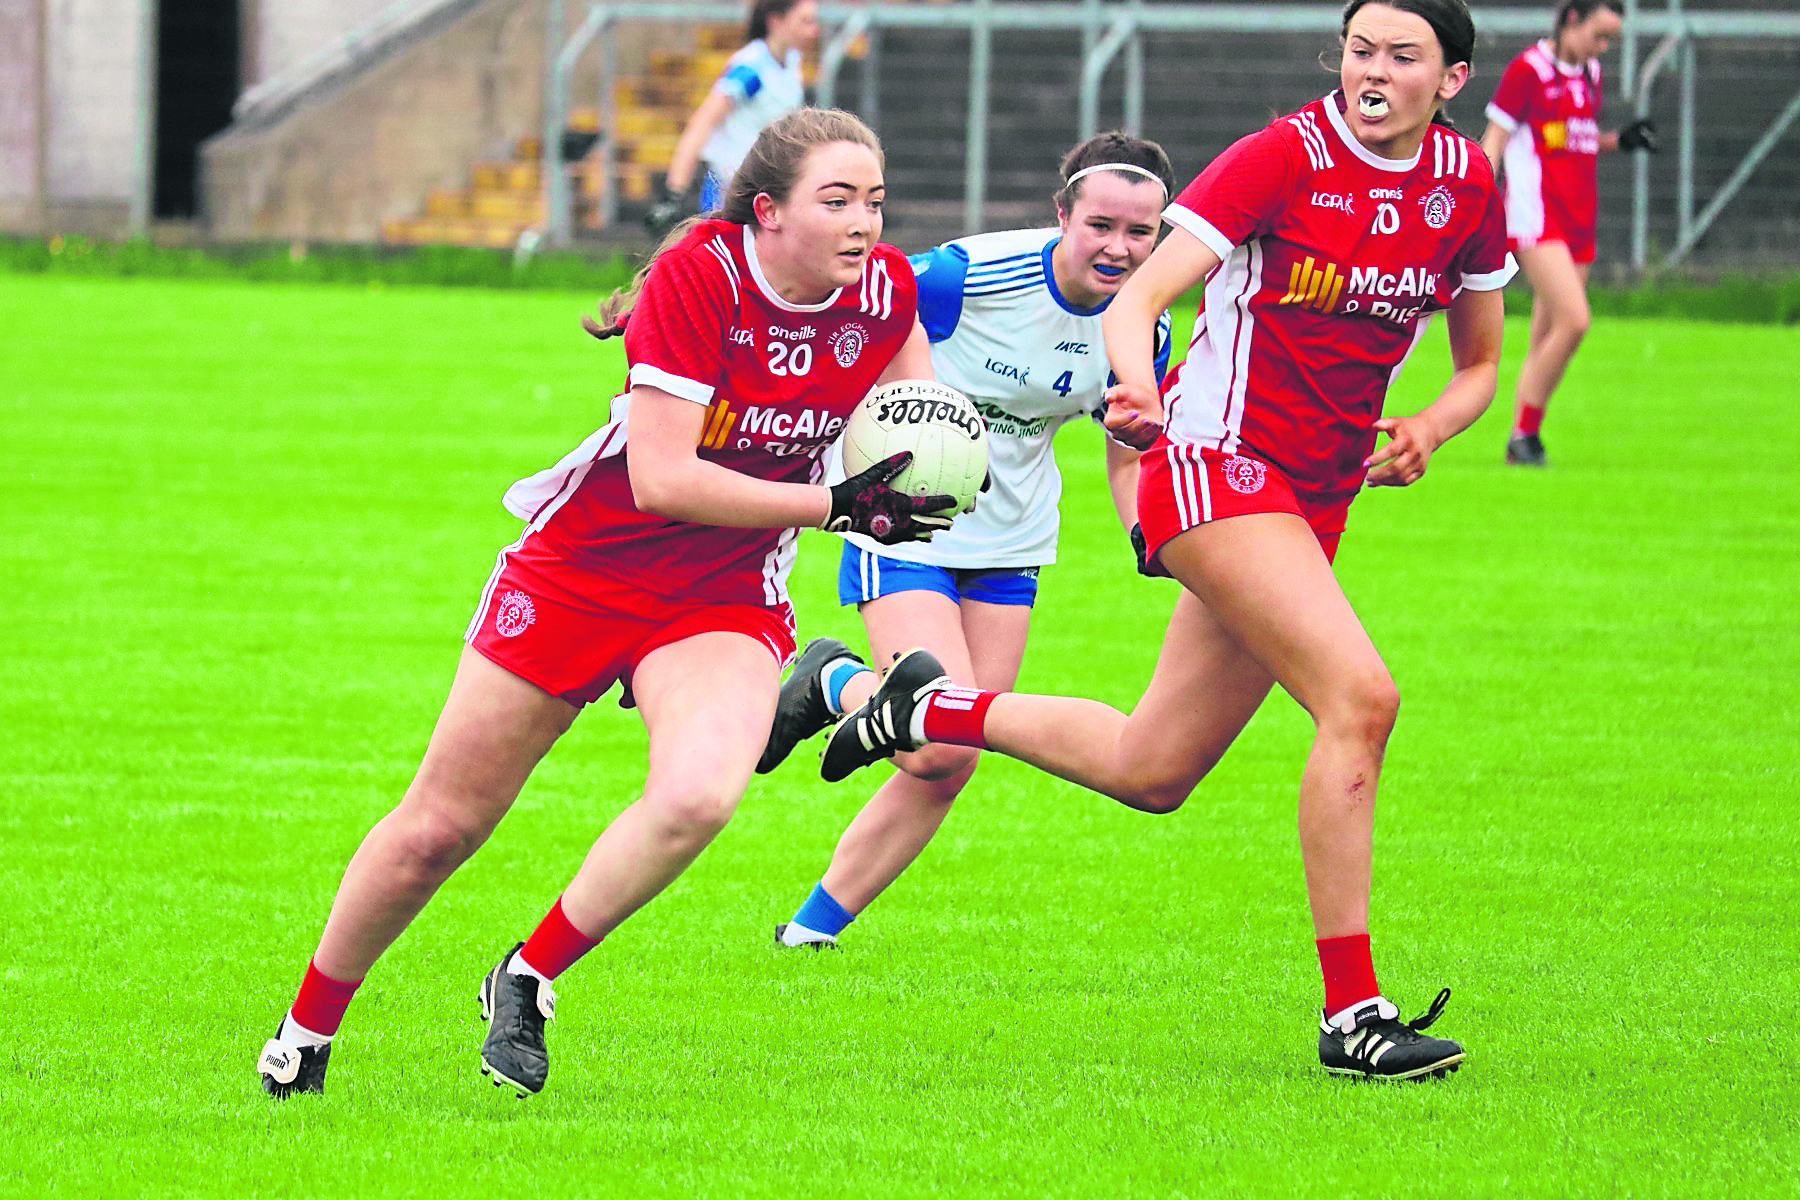 Minor Ladies no match for Monaghan